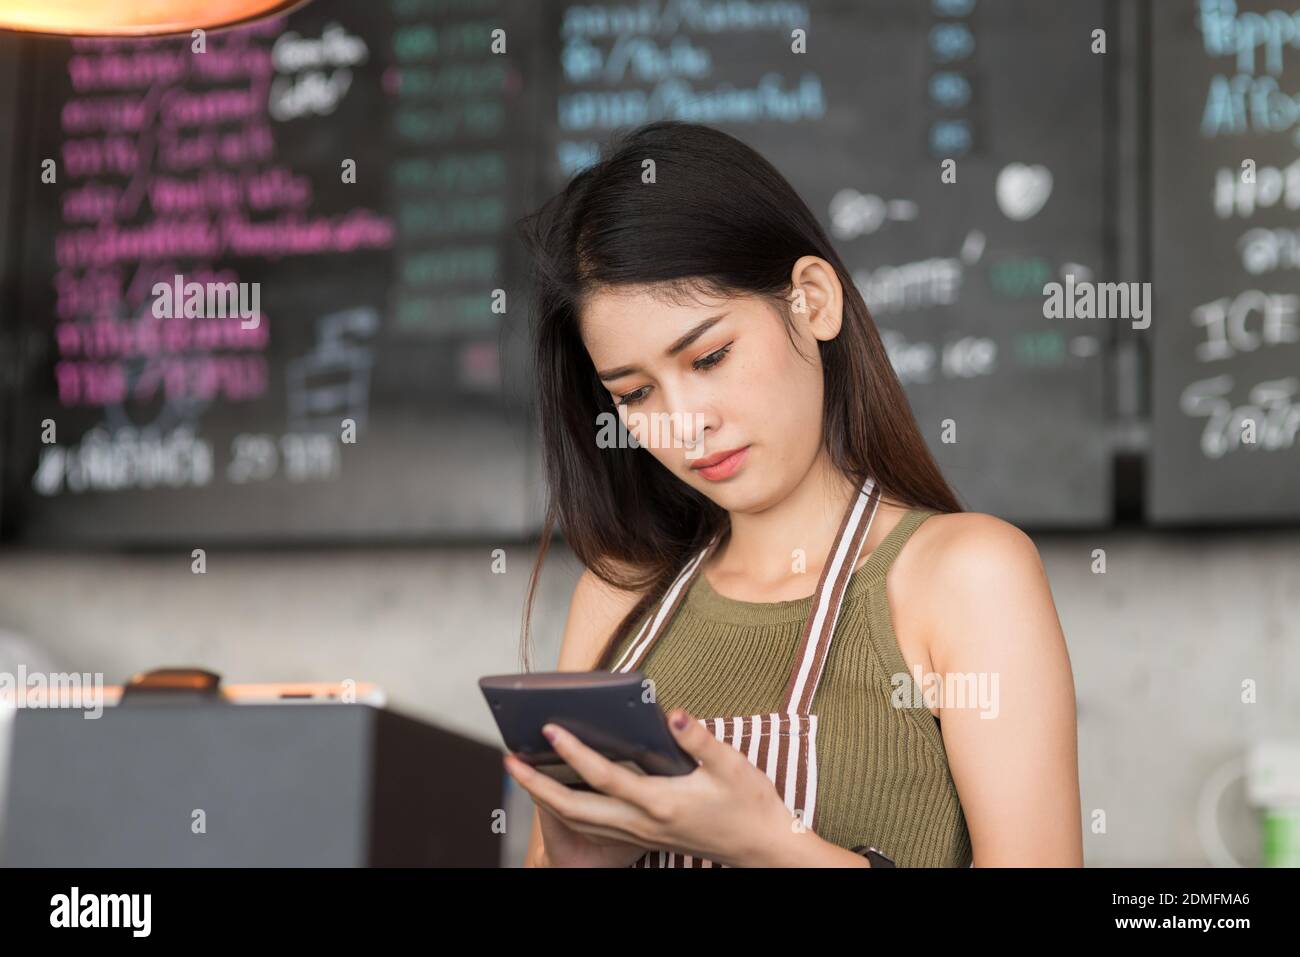 Female Owner Using Calculator At Cafe Stock Photo - Alamy